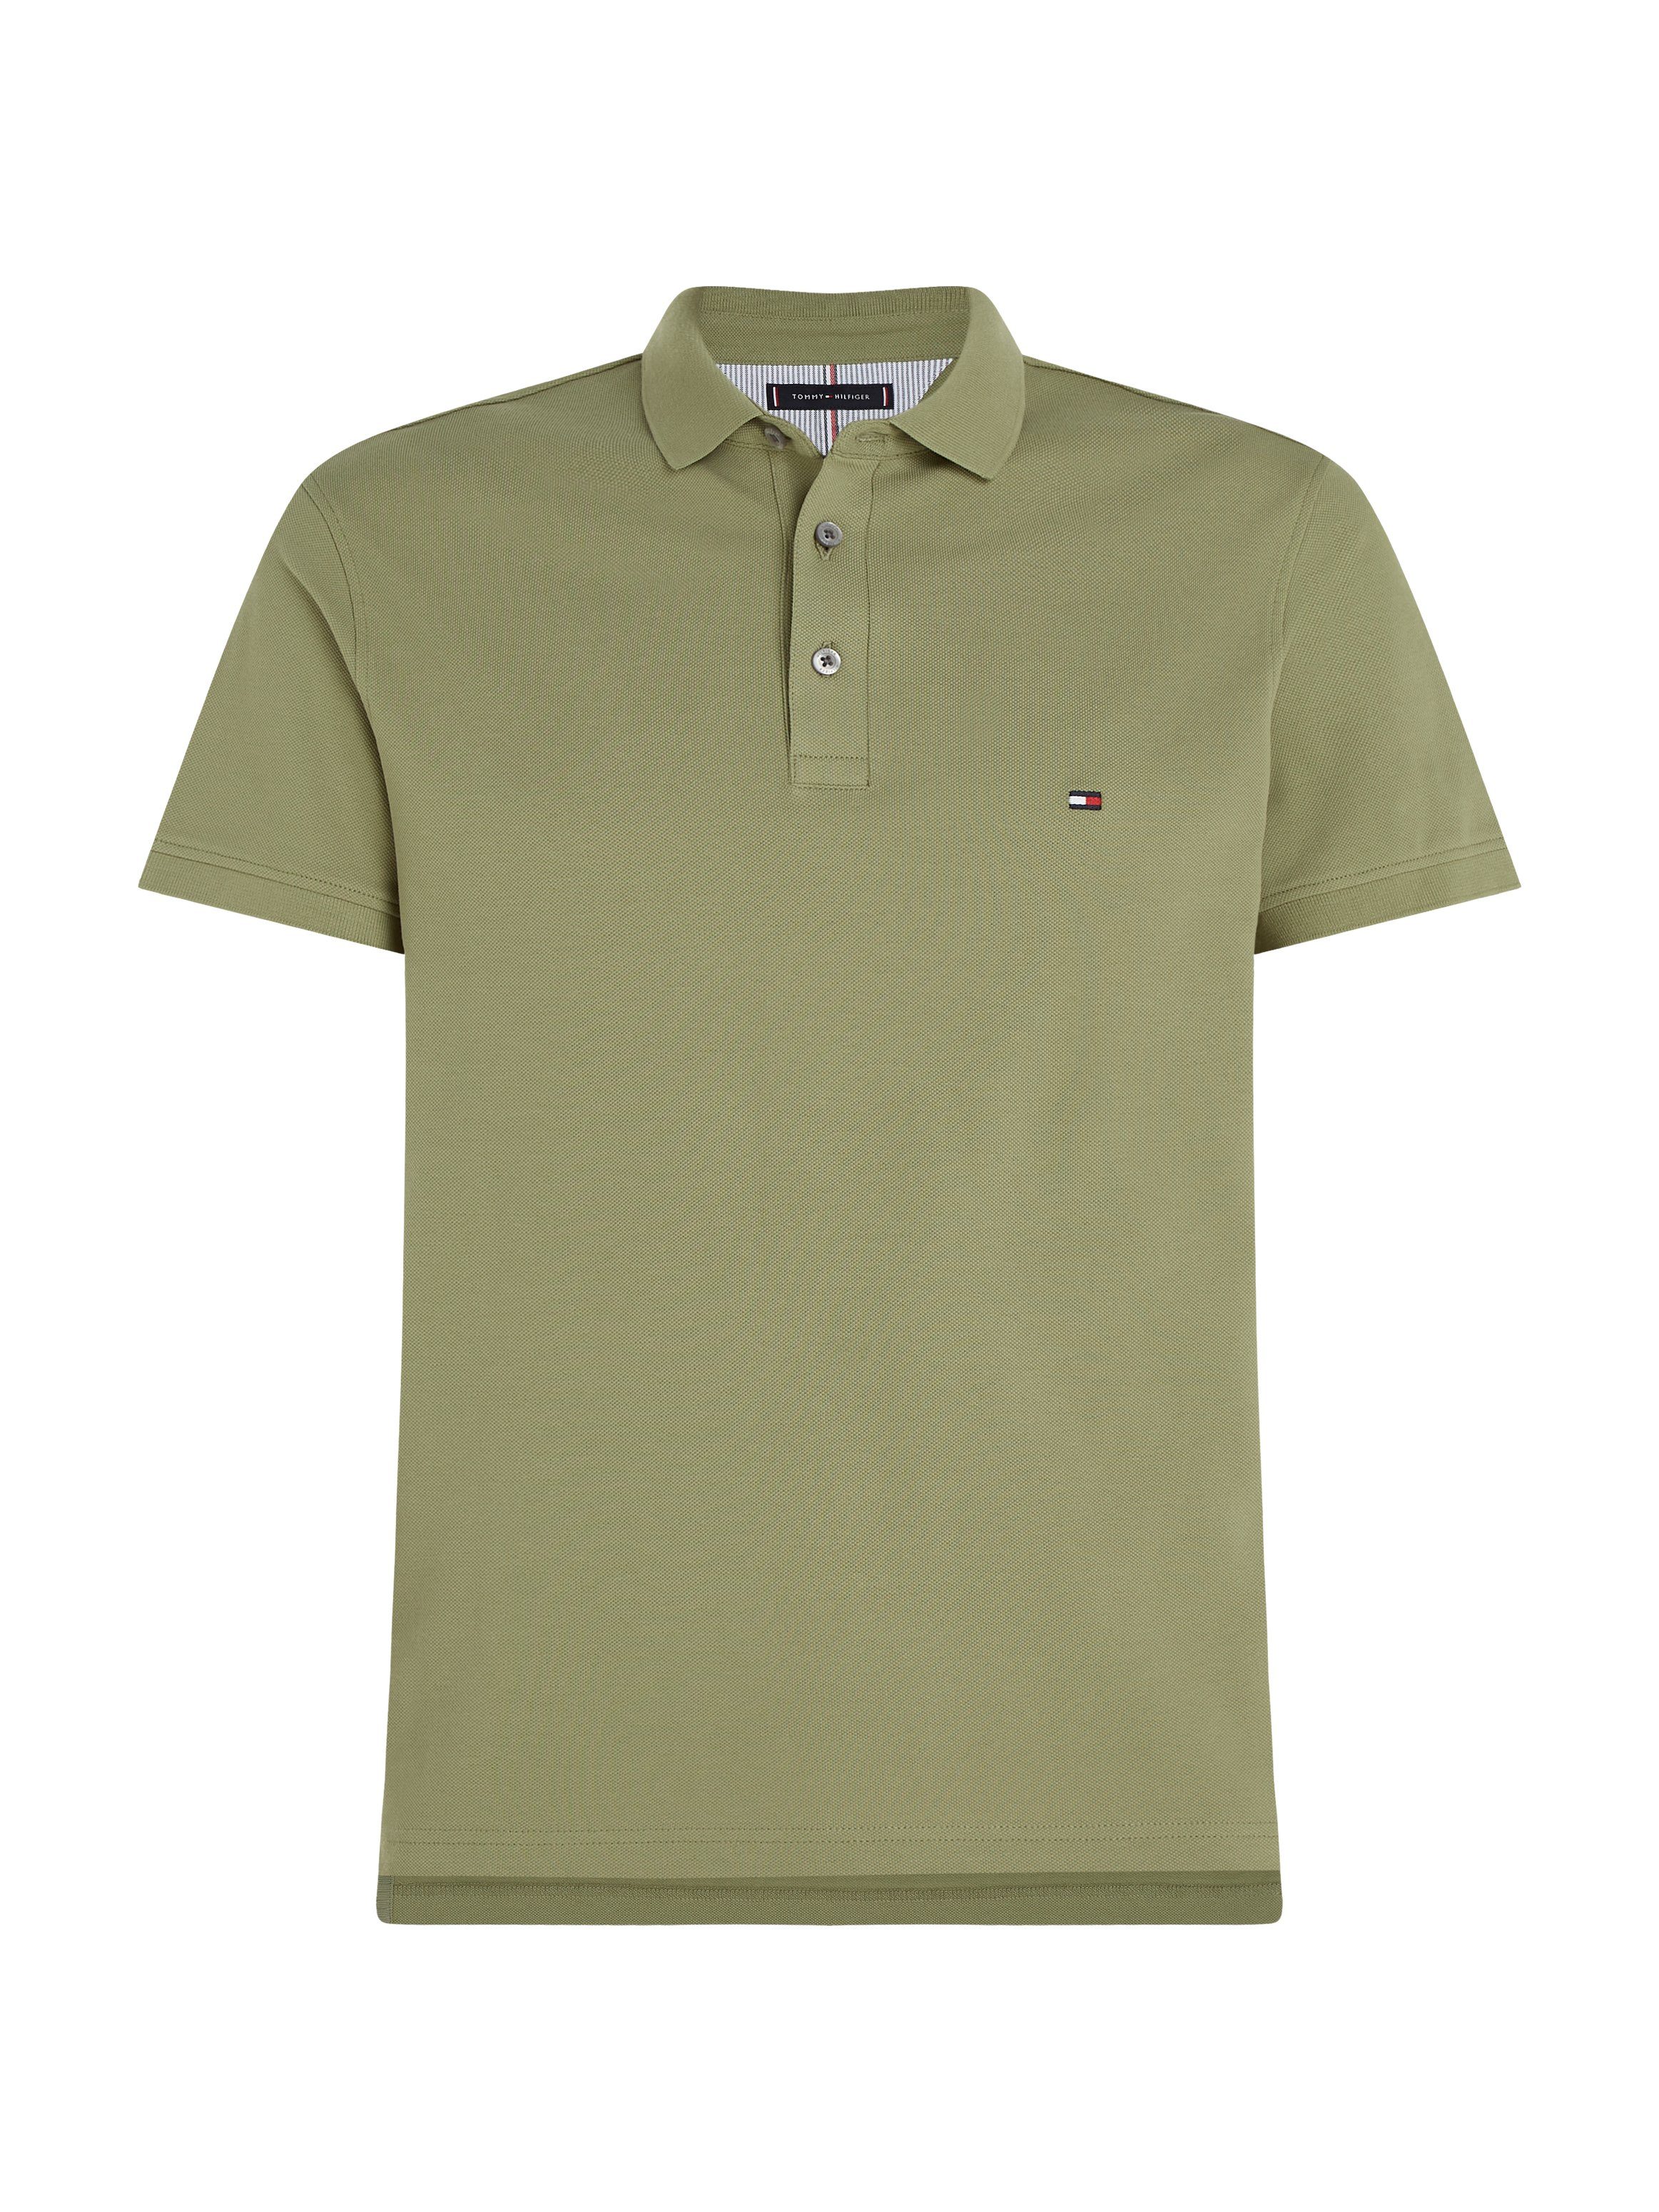 Tommy 1985 Olive Faded Poloshirt Logostickerei SLIM POLO mit Hilfiger